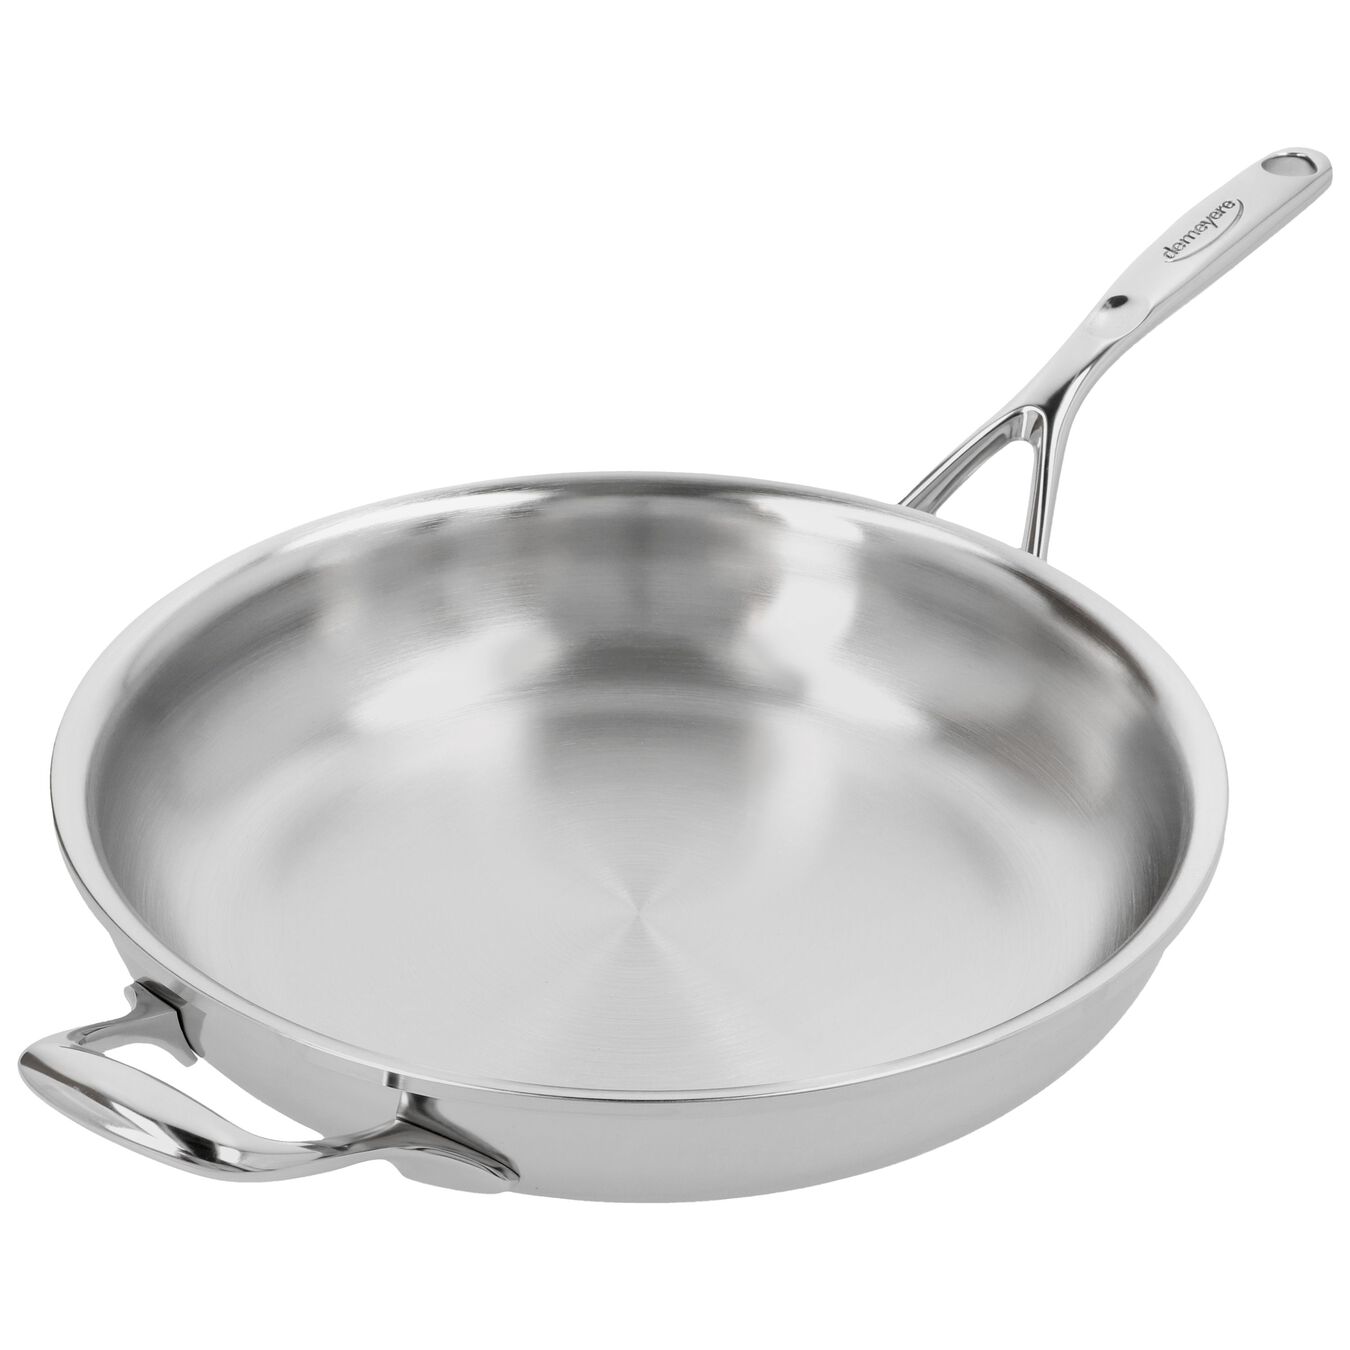 11-inch, 18/10 Stainless Steel, Proline Fry Pan with Helper Handle,,large 2